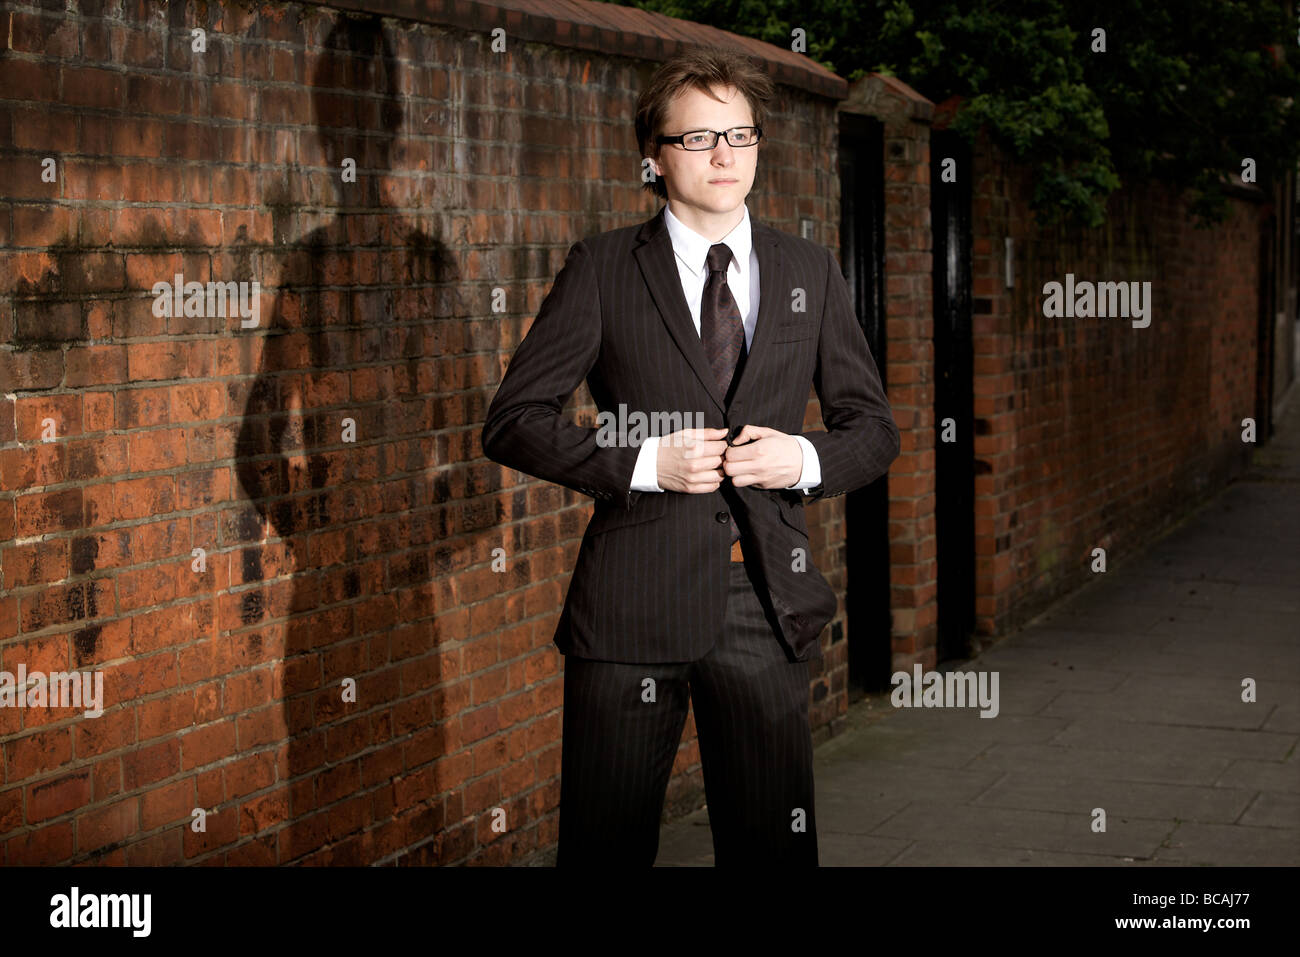 A suited young professional man stands on an urban street while buttoning his suit jacket in Marylebone, London, England. Stock Photo